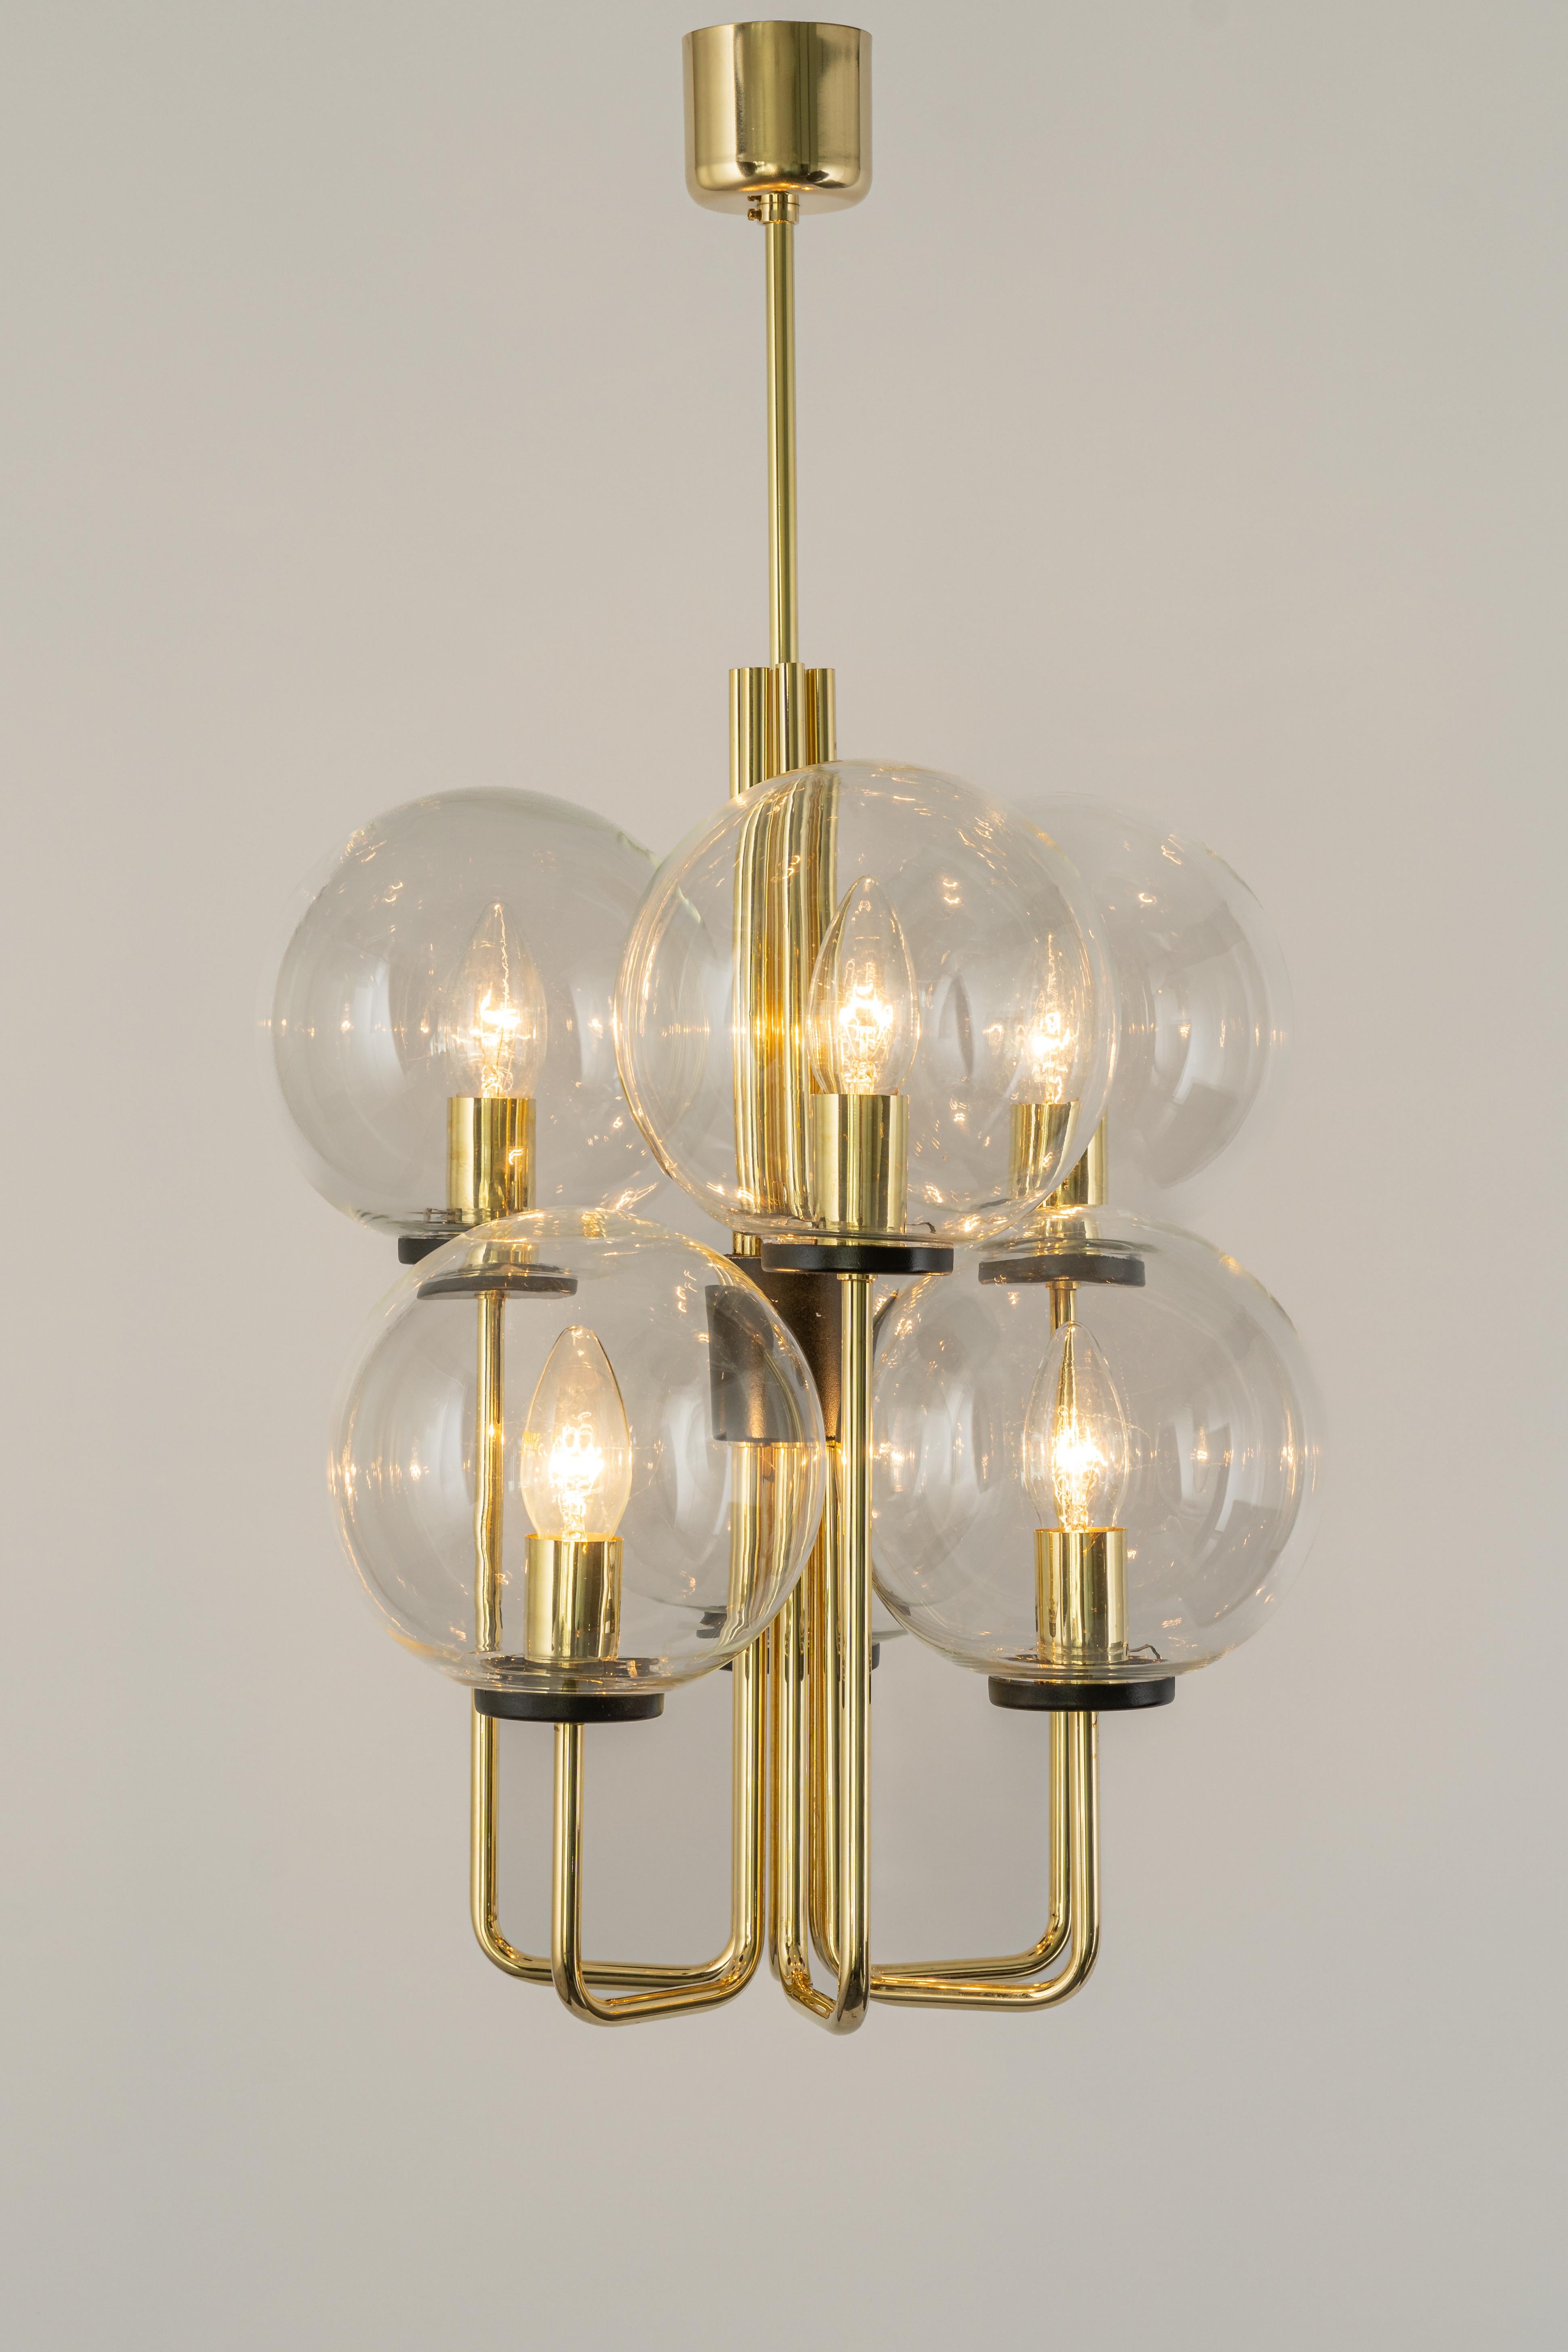 Six-light brass chandelier in the style of Sciolari.
Smoked glass in a very beautiful smokey brown color.
Made with brass, best of the 1970s.

High quality and in very good condition. Cleaned, well-wired and ready to use. 

The fixture